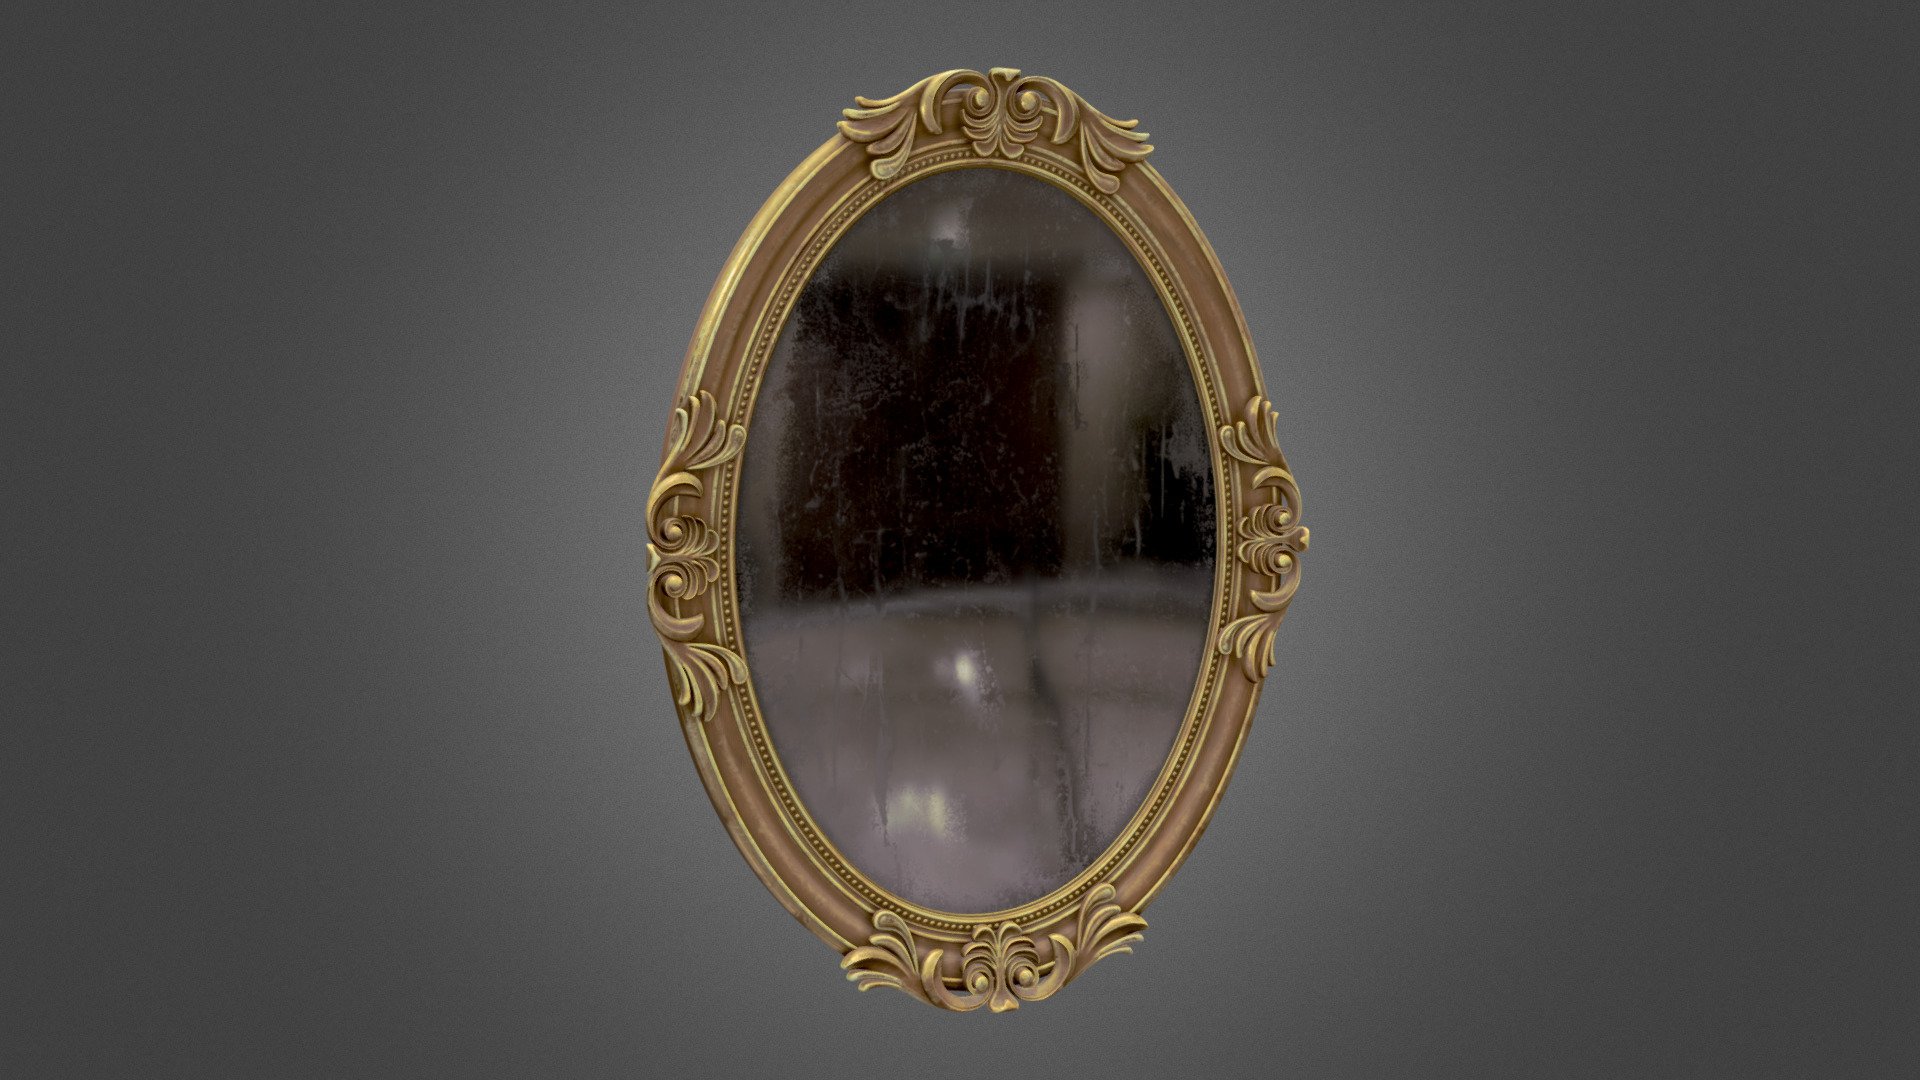 Victorian Mirror / Picture Frame

A very detailed victorian style mirror, that also can be used as a picture frame just replacing the base color texture of the mirror.

Two versions are available: High poly mesh that can be use for close ups, in 3D animations or games in Unreal Engine 5 using nanite. And a low poly version that is also very detailed but some details was baked in the normal map to save performance in realtime aplications.

Textures are all in 4k resolution and include:
* Base Color
* Metallic
* Roughness
* Normal Map 

The low poly version also includes an Ambient Occulison texture 3d model